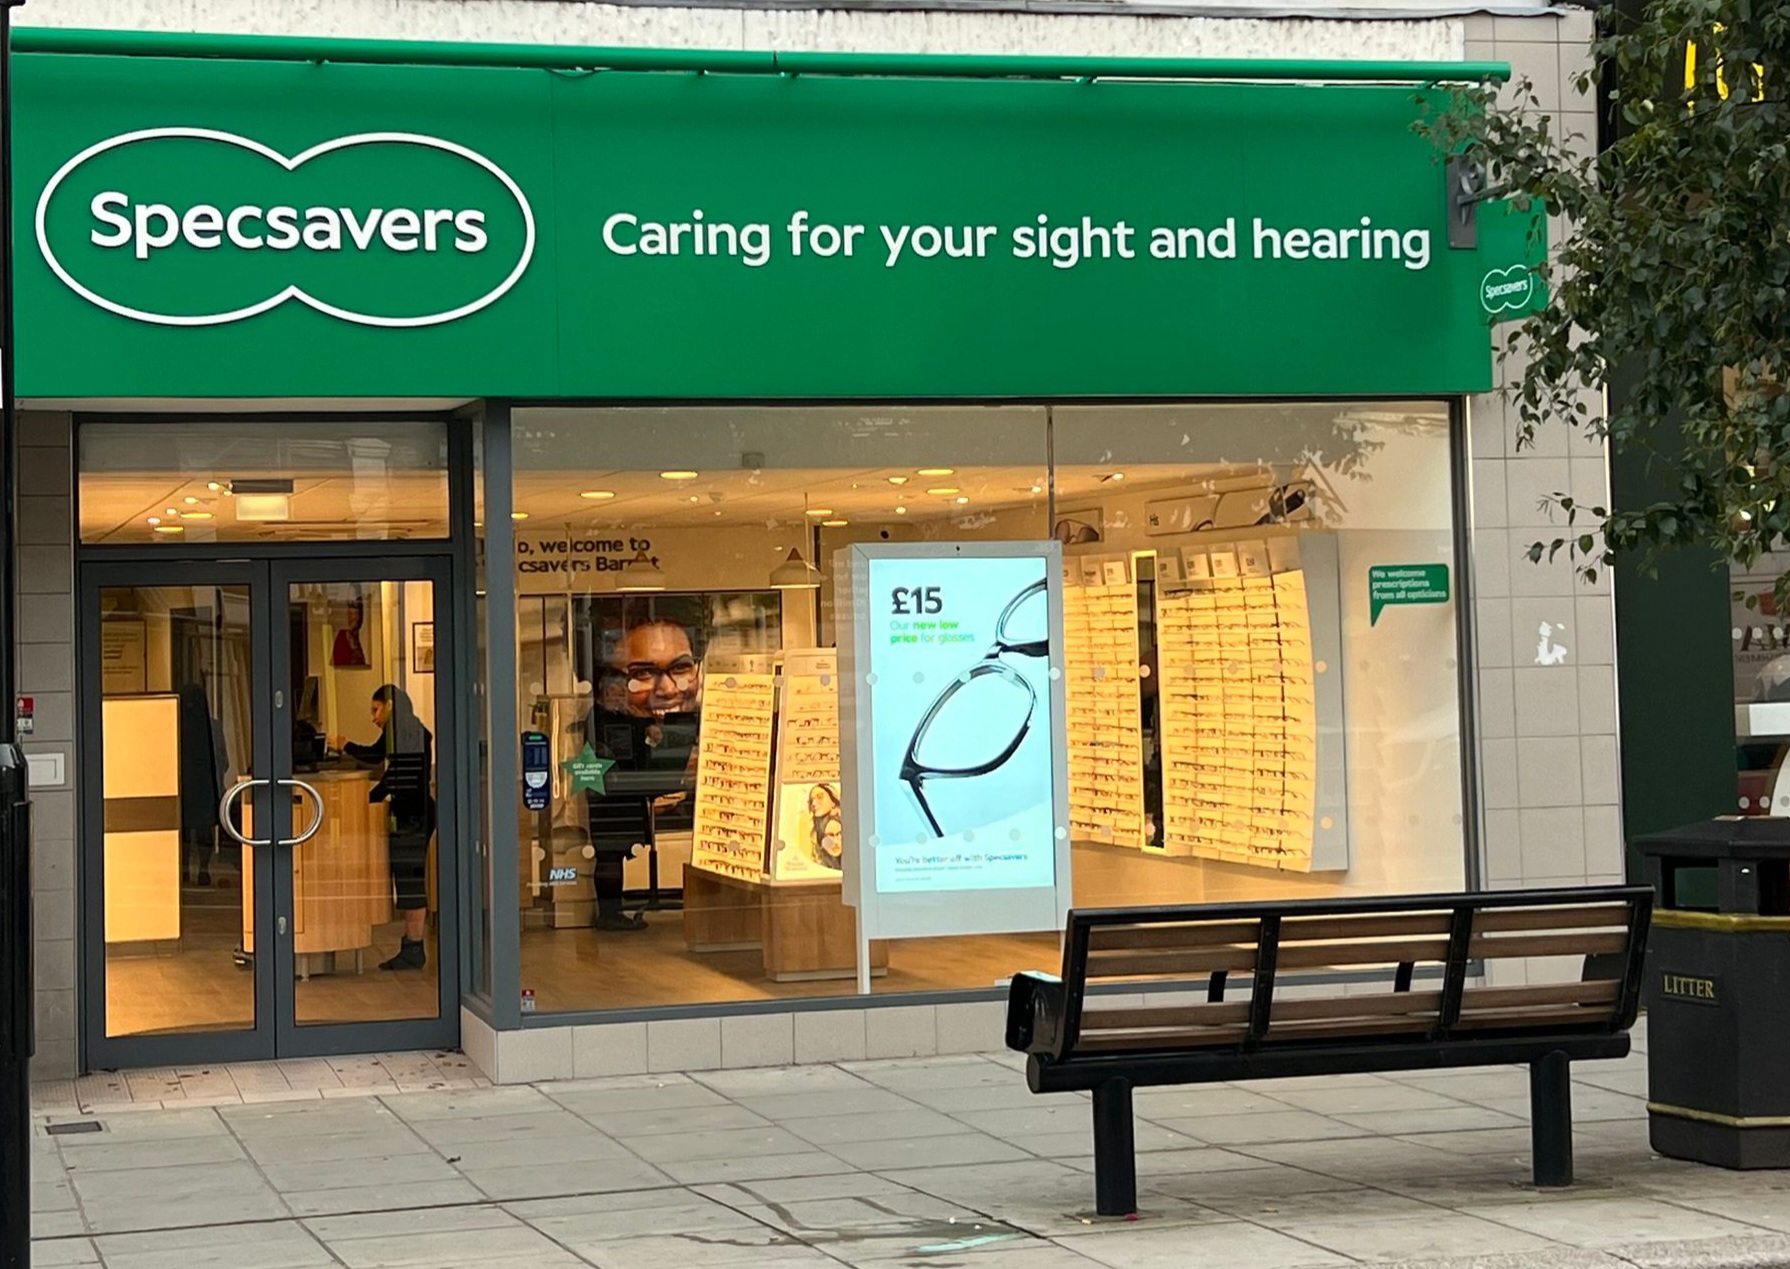 Specsavers Opticians and Audiologists - Barnet Specsavers Opticians and Audiologists - Barnet Barnet 020 8364 8881